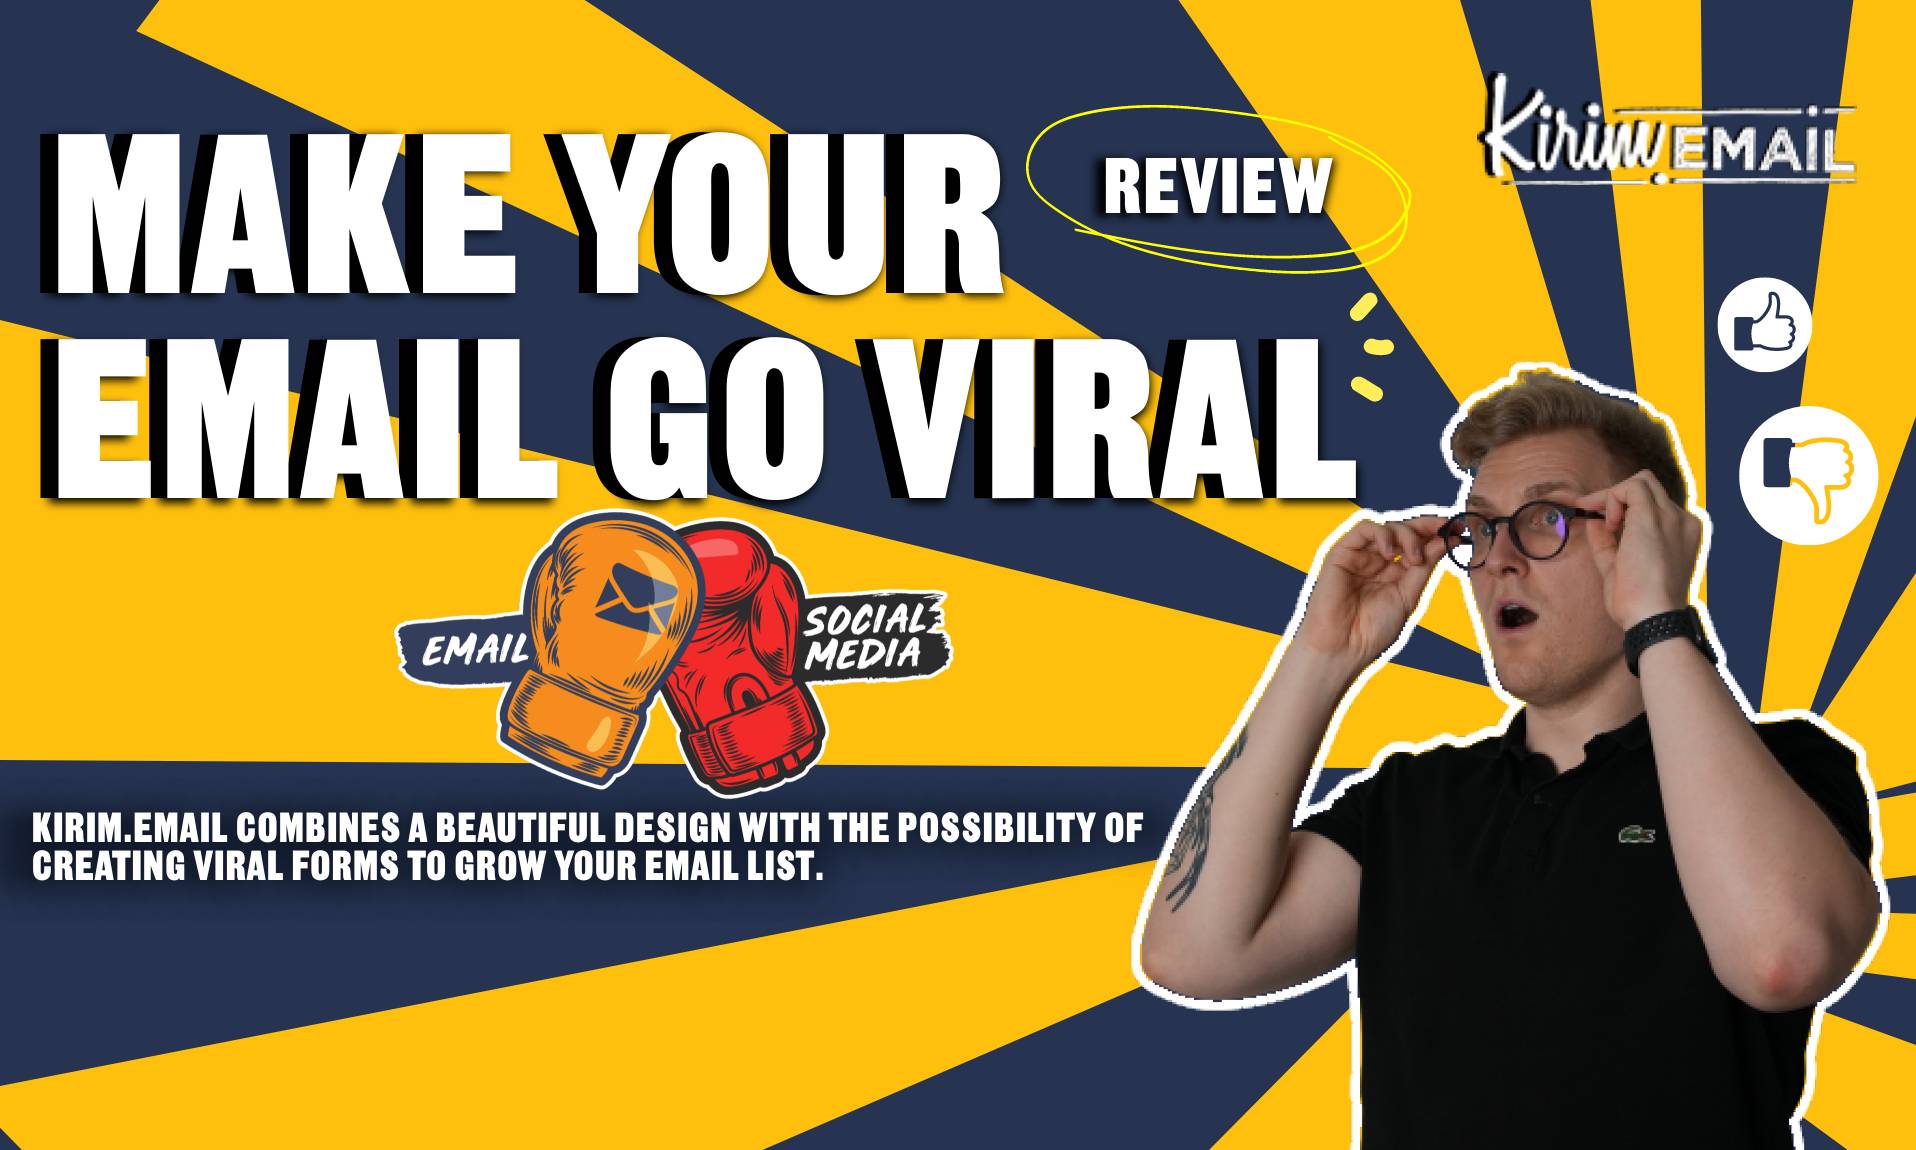 Kirim.email Review - Grow you email list to go viral